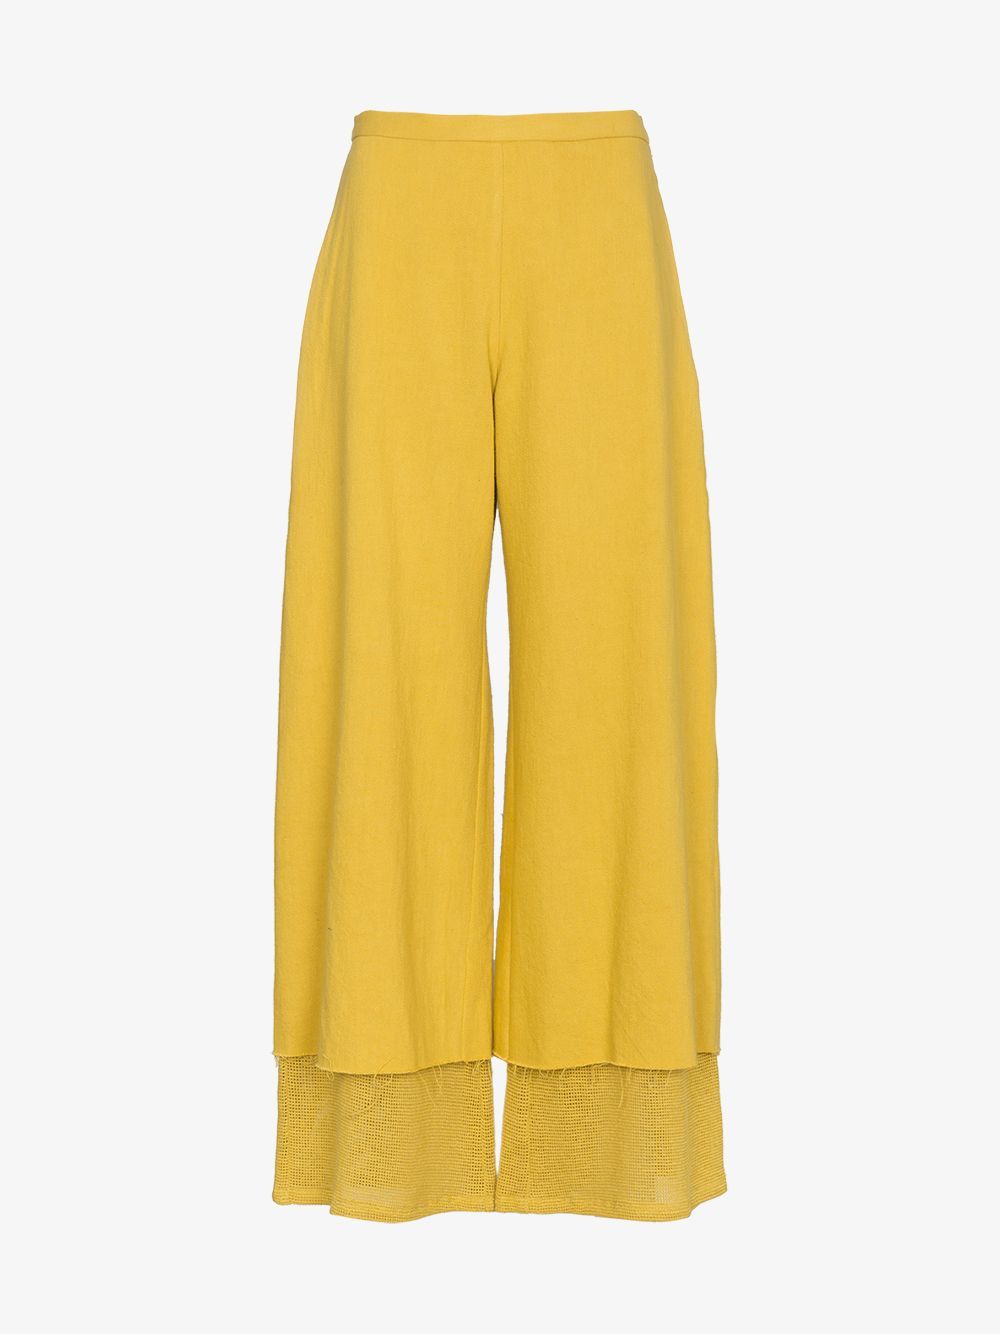 Simon Miller Yellow Yarnell Trousers | Browns Fashion